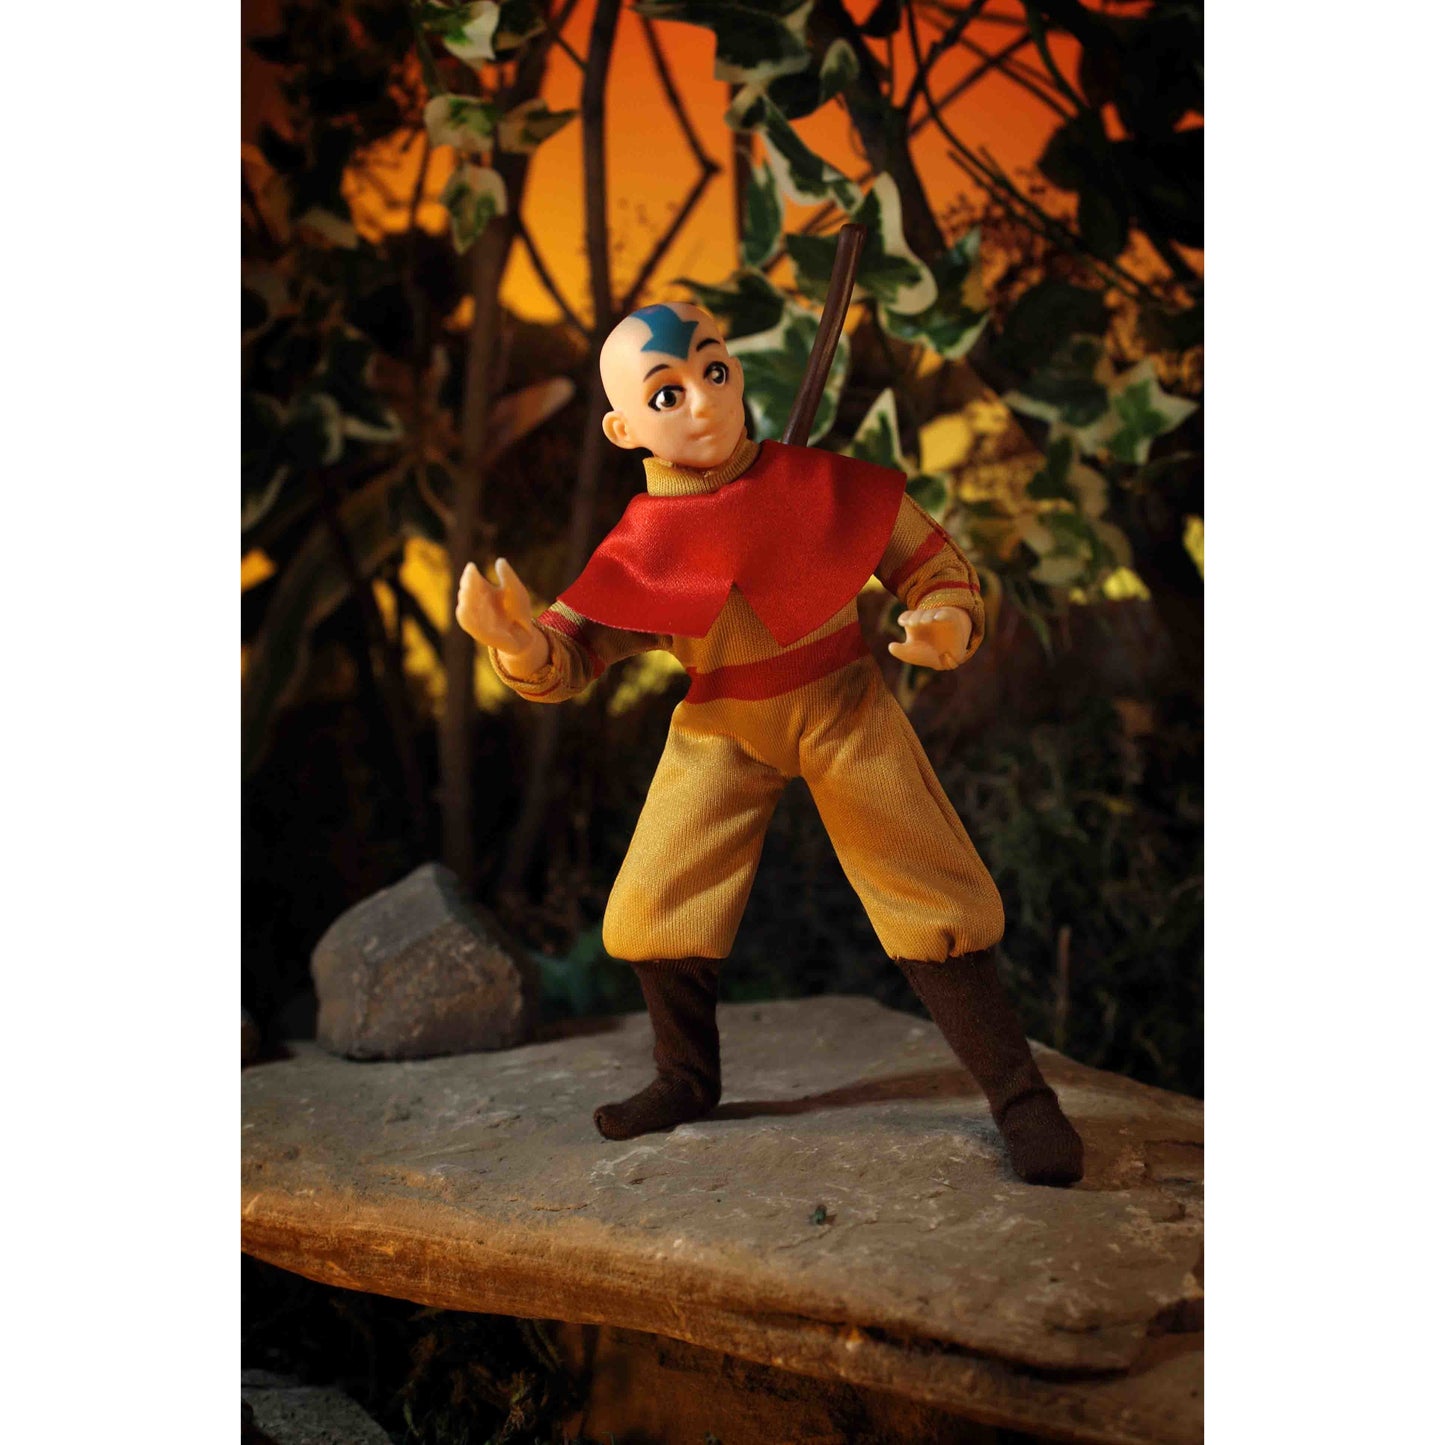 Avatar: The Last Airbender 8" Action Figure - Aang